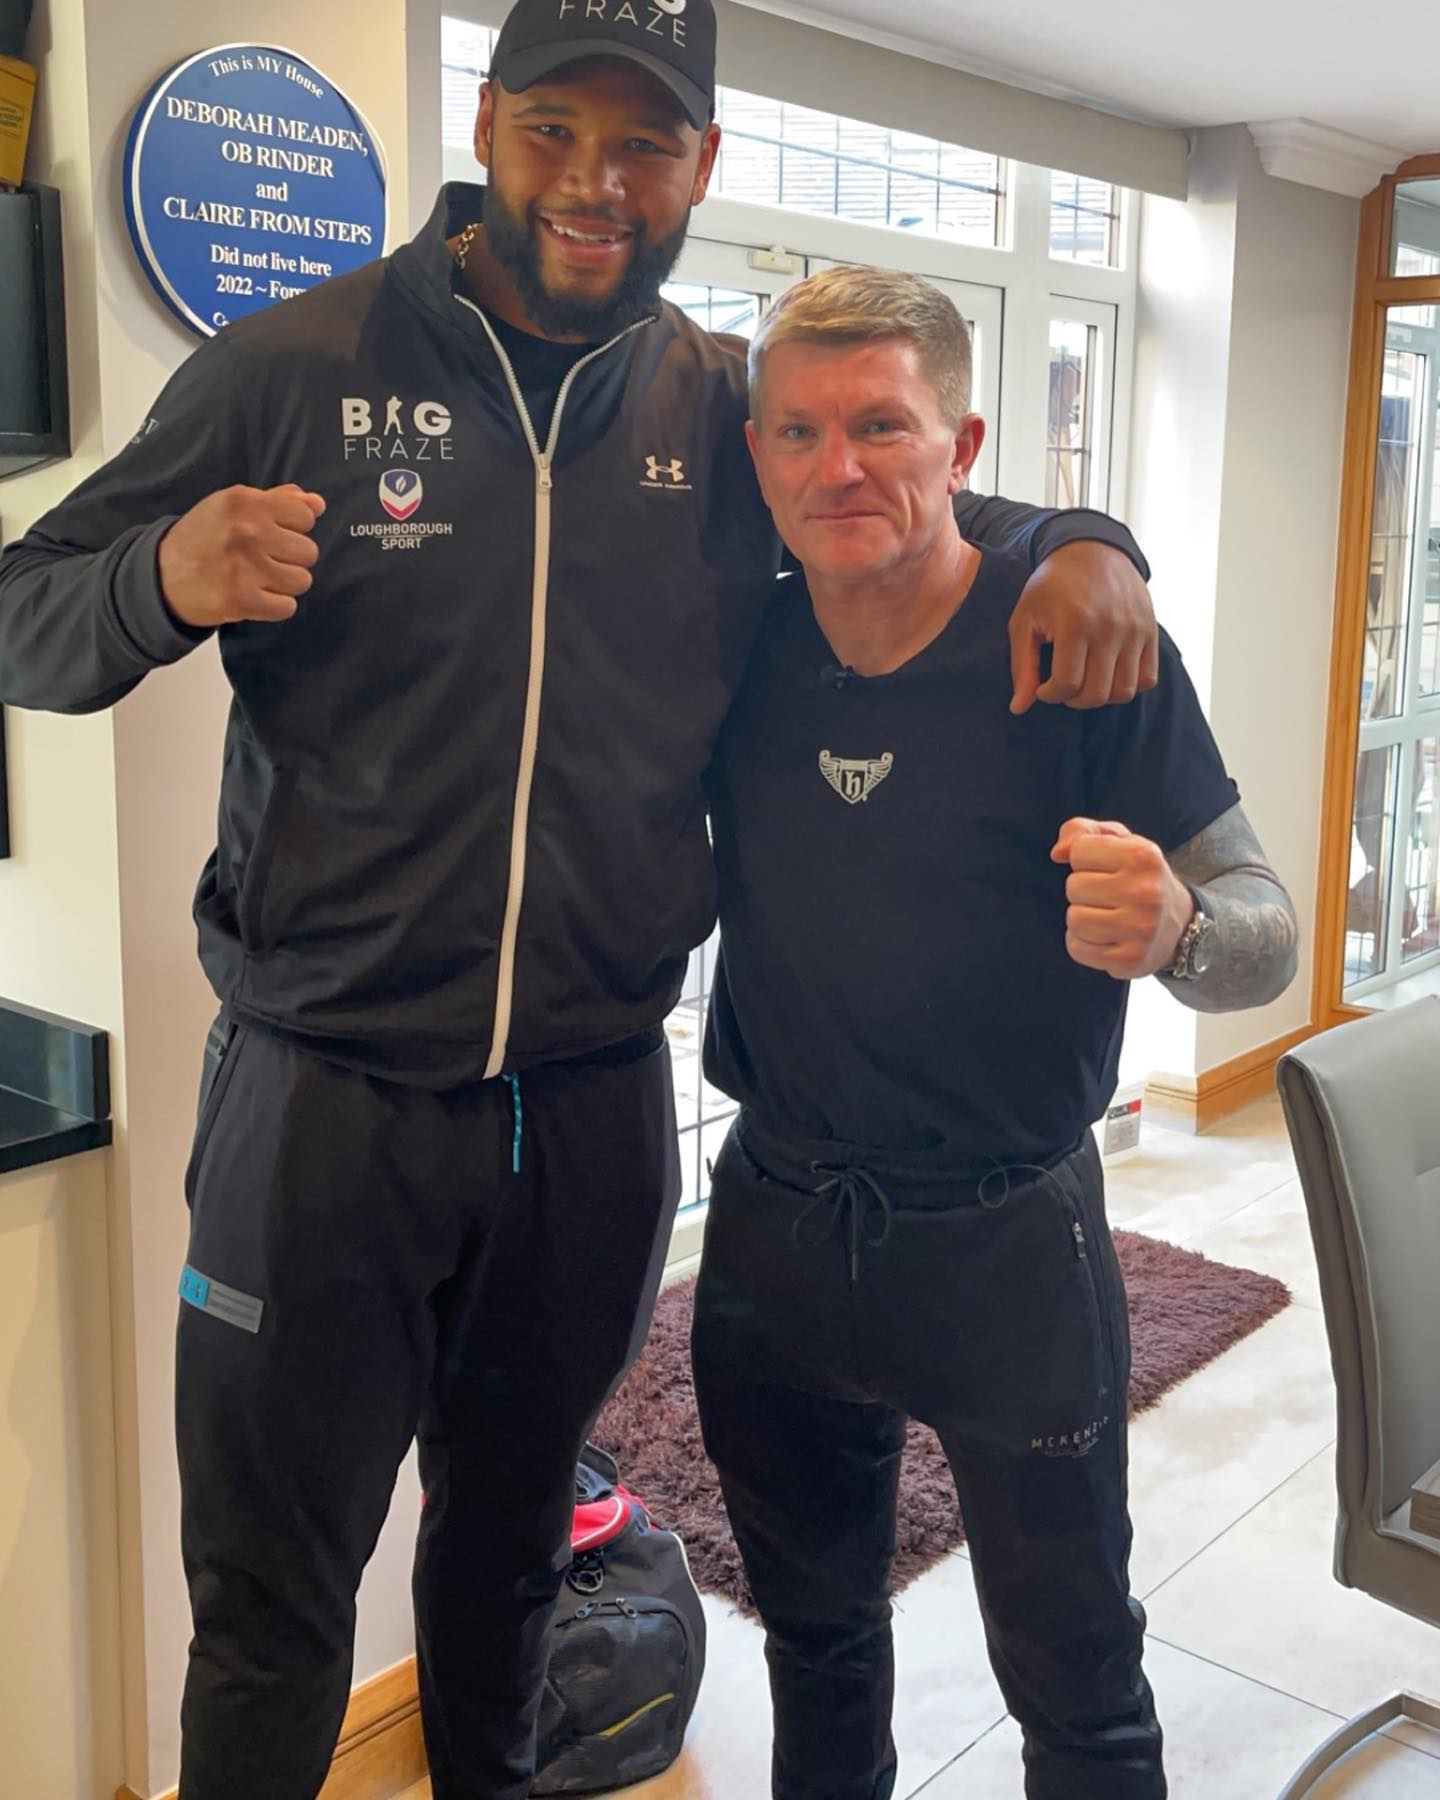 Ricky Hatton has undergone an incredible body transformation